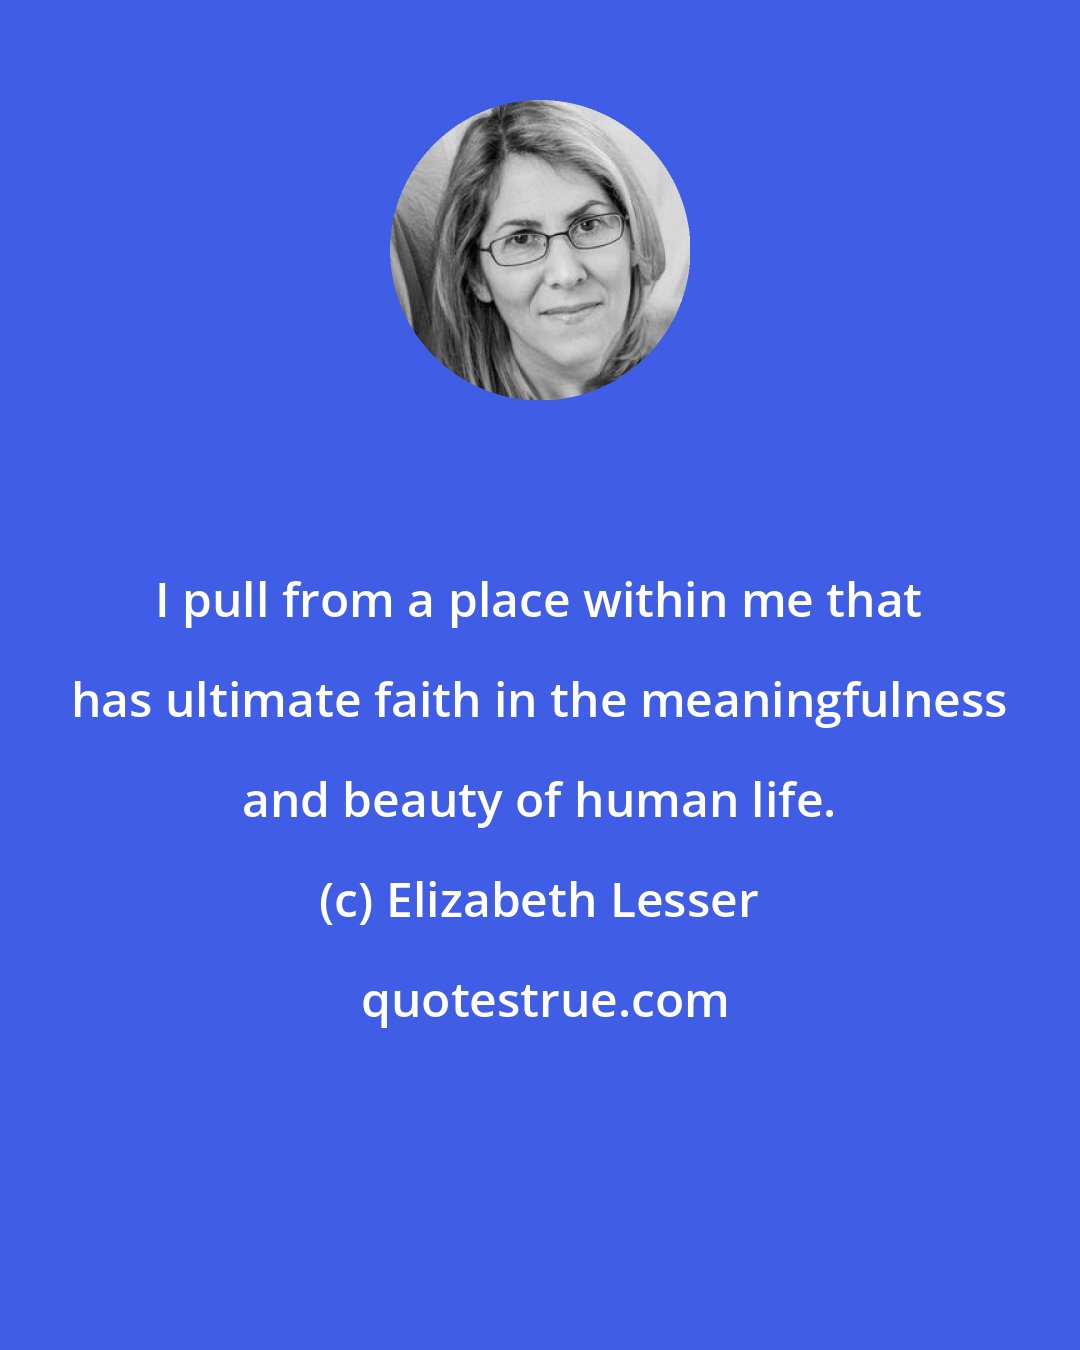 Elizabeth Lesser: I pull from a place within me that has ultimate faith in the meaningfulness and beauty of human life.